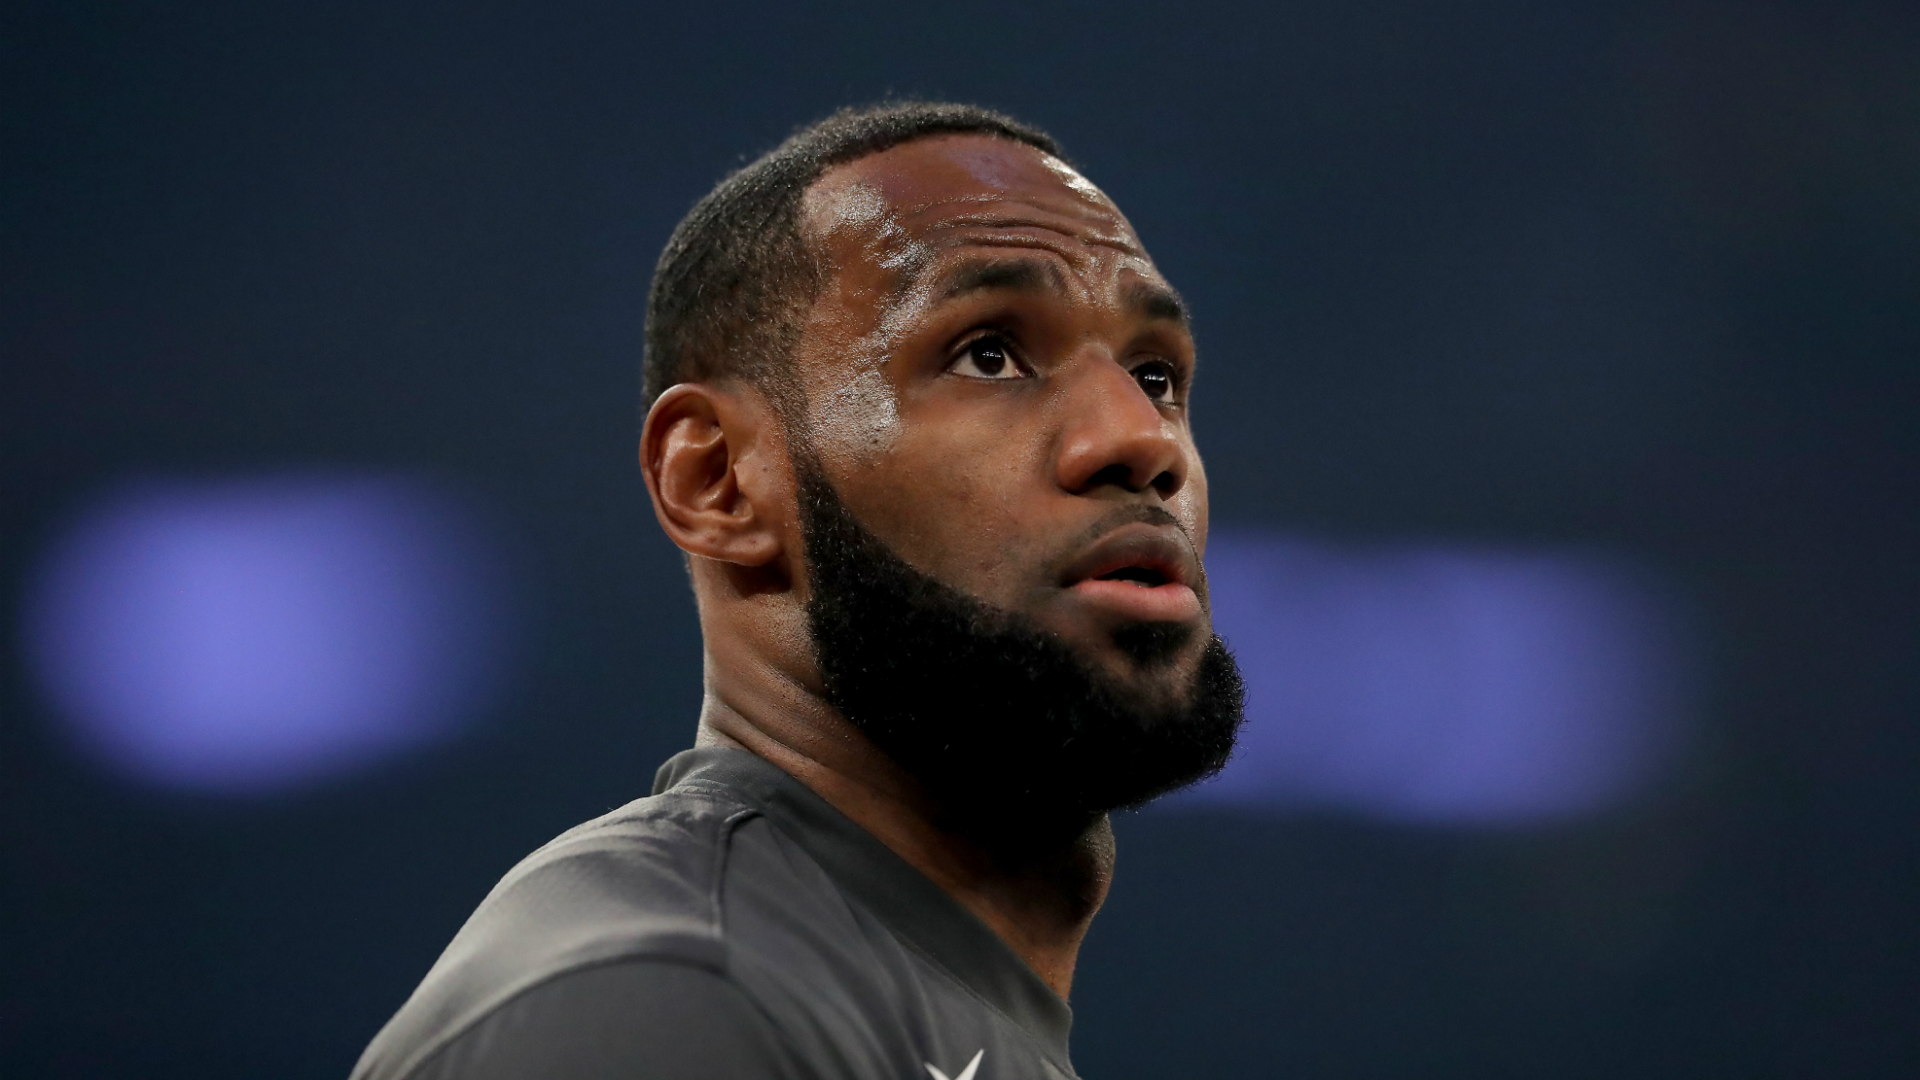 Los Angeles Lakers star LeBron James recounted how Kobe Bryant inspired him after overtaking the NBA icon in career points.